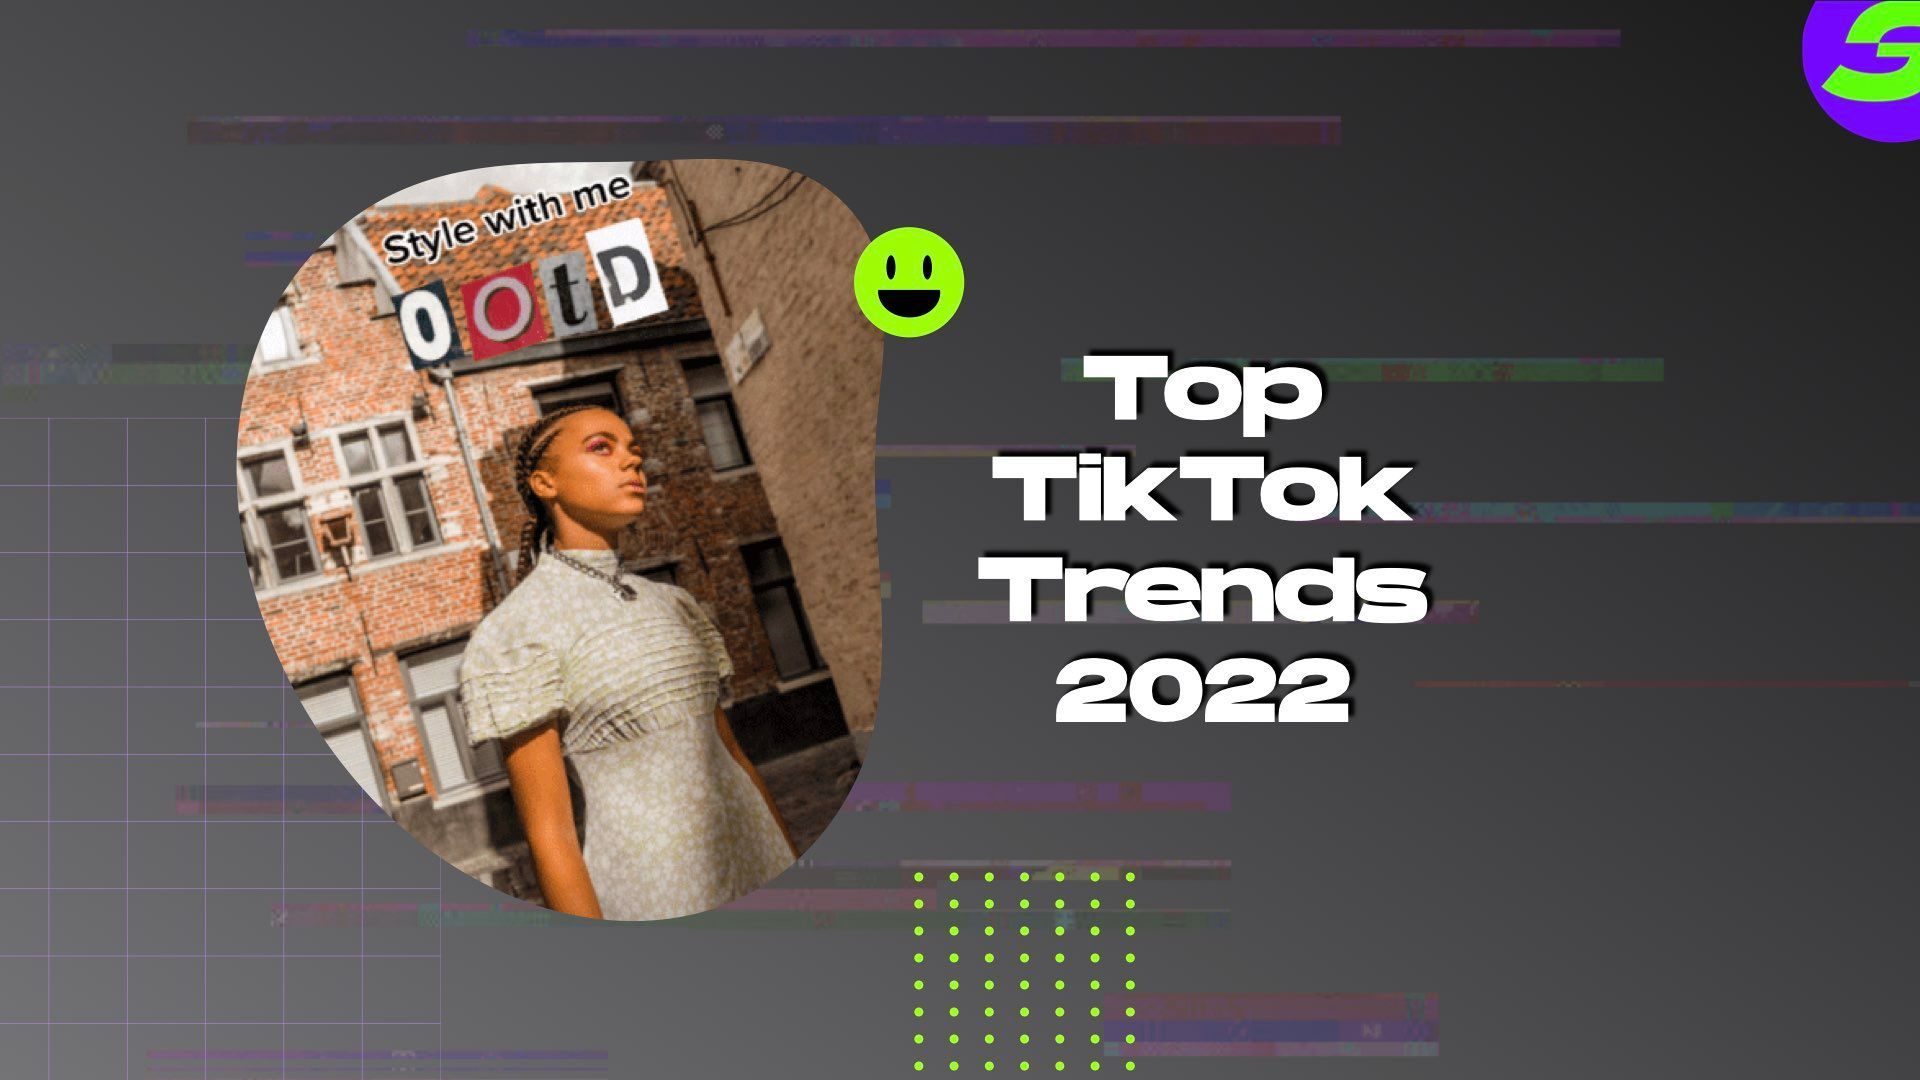 shotcut free video editor android Top TikTok Trends 2022